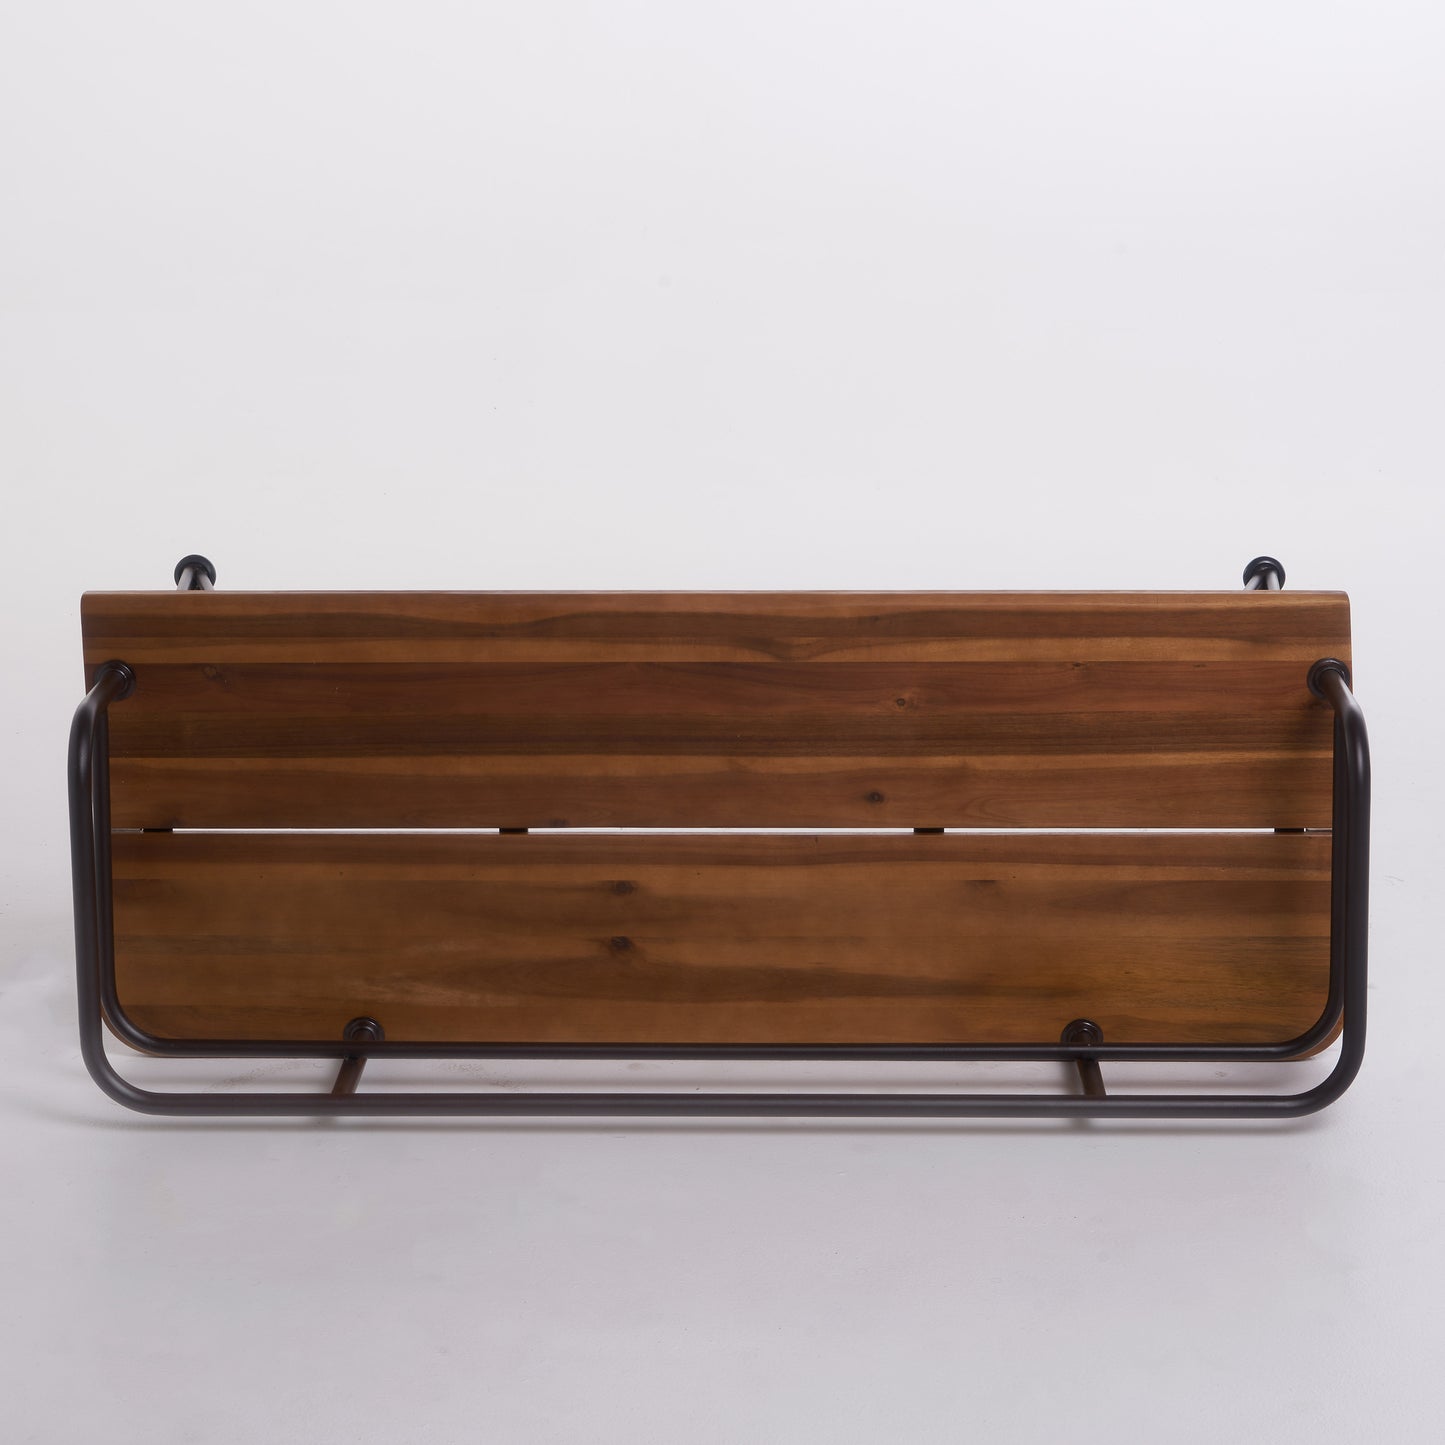 ZION INDUSTRIAL WOOD AND METAL BENCH